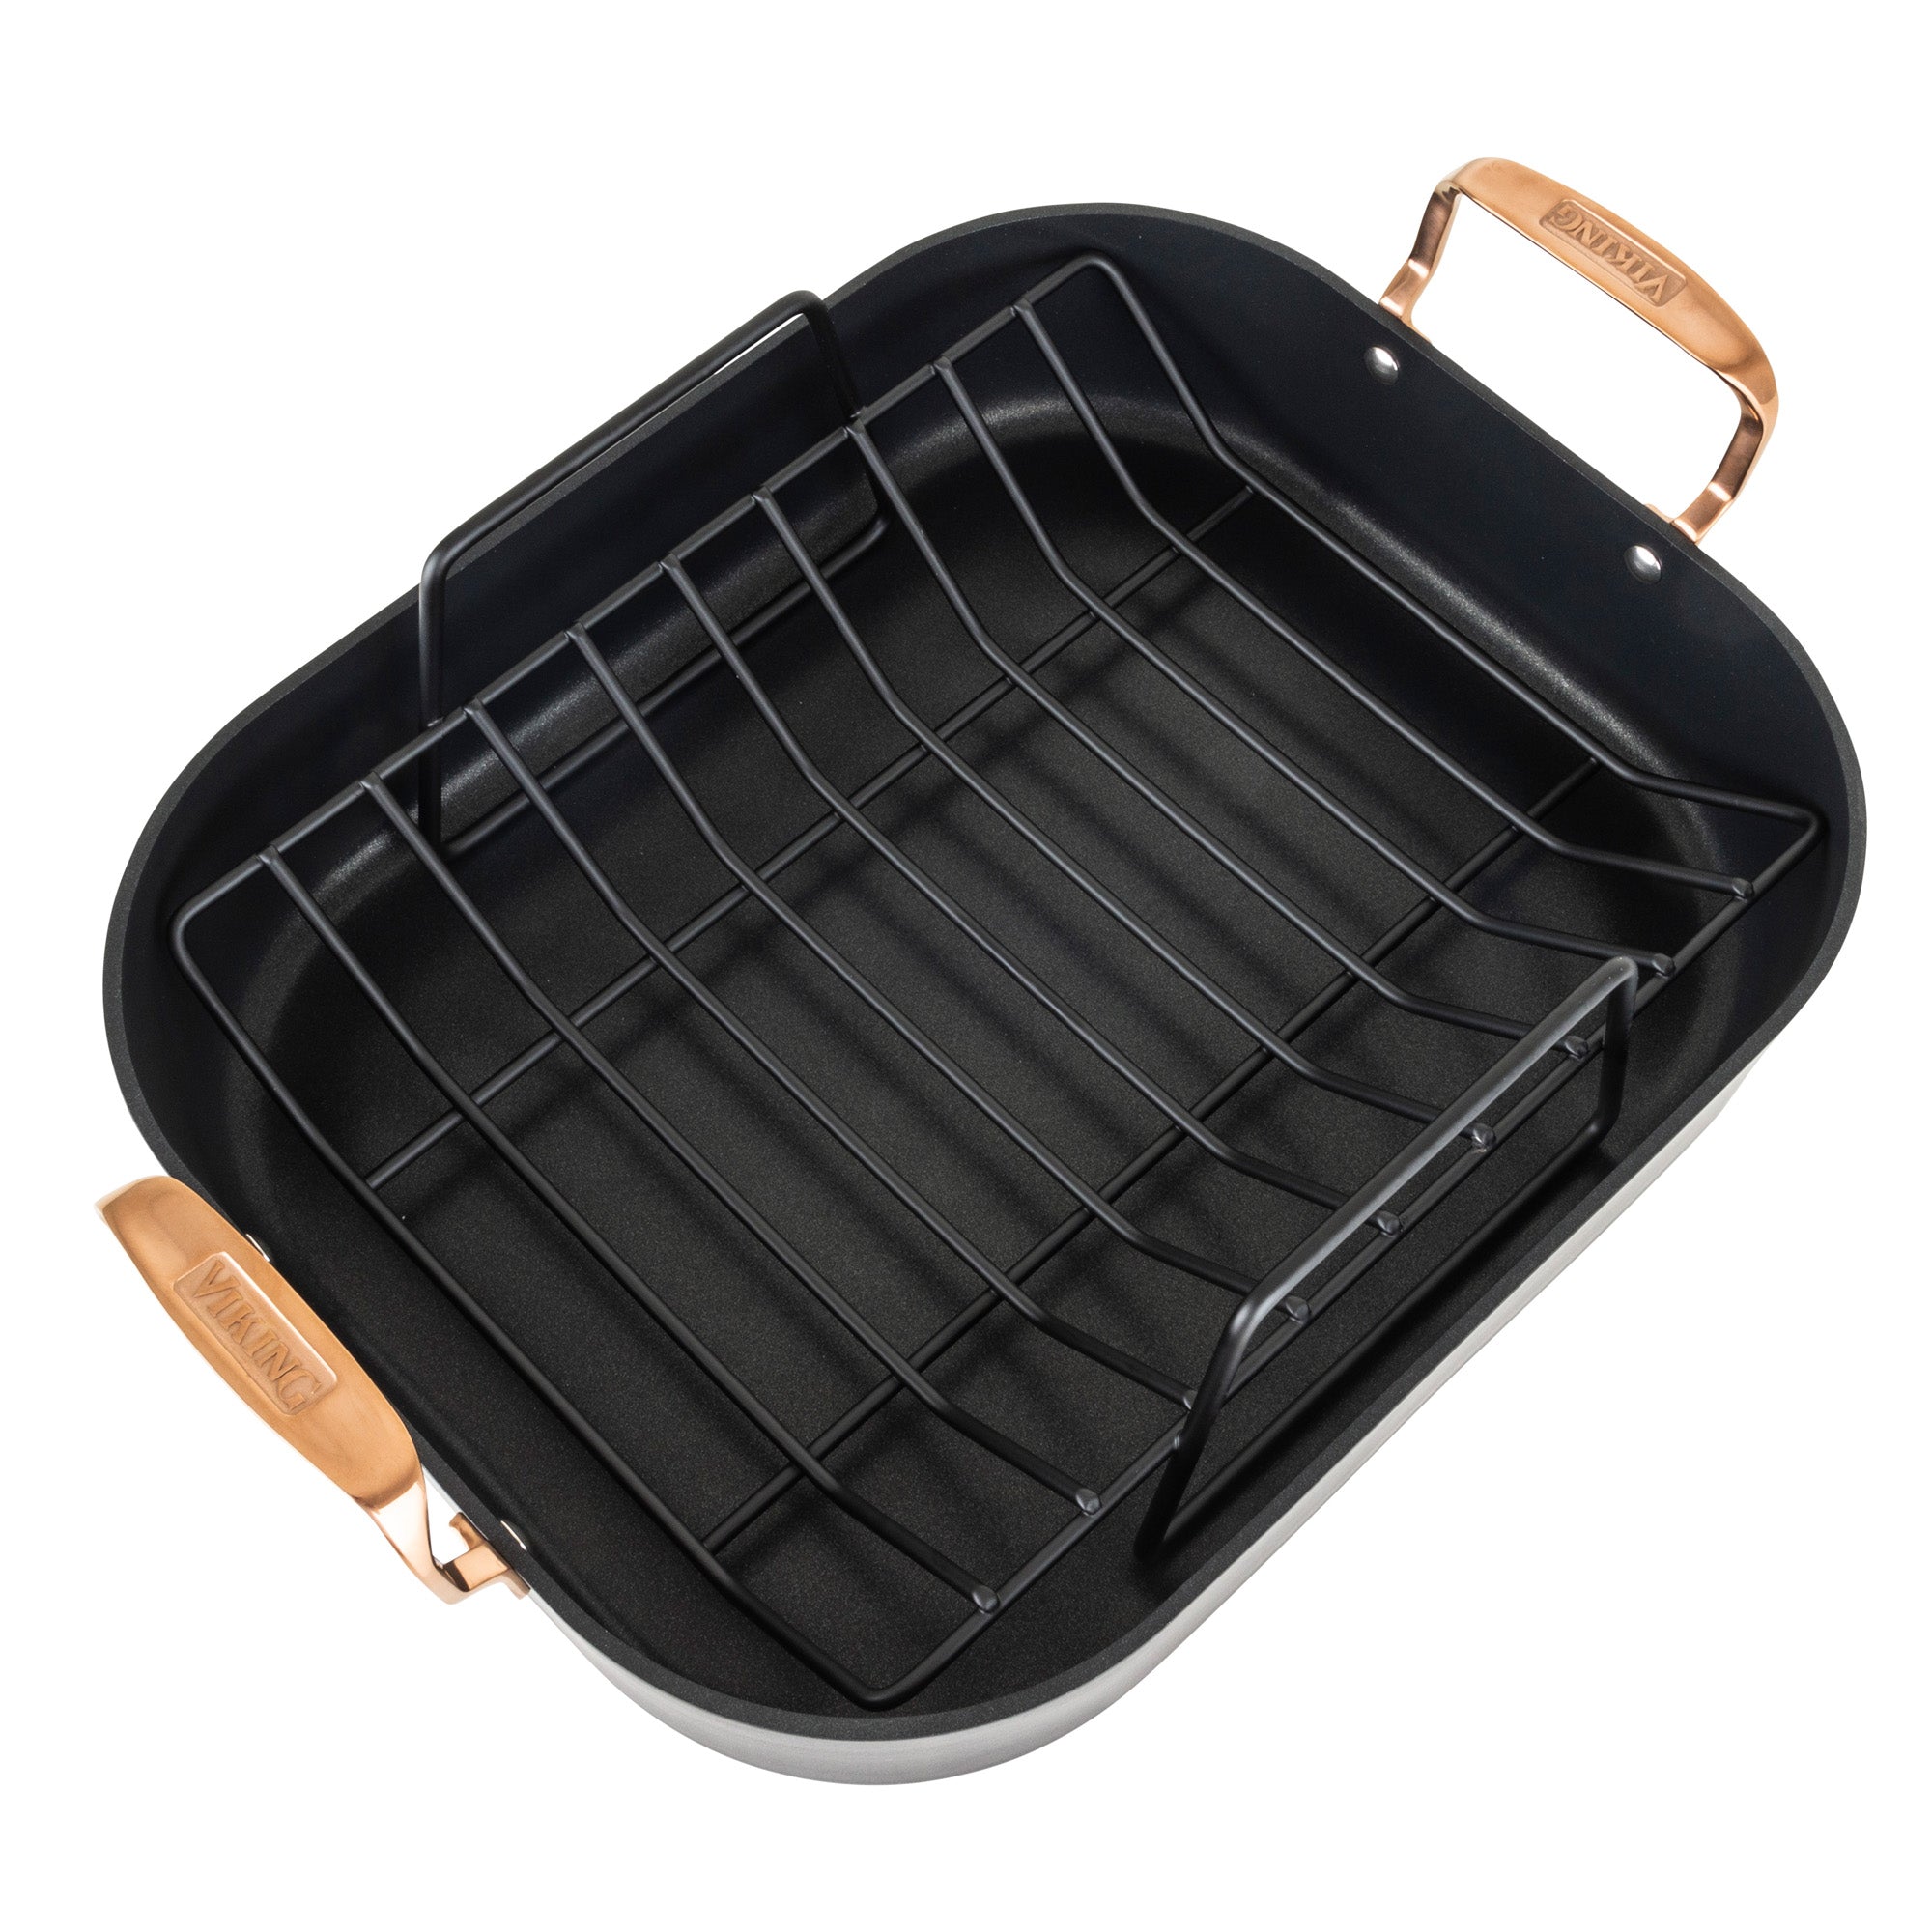 Viking Hard Anodized Nonstick Roaster with Copper Handles, Rack, and Bonus Carving Set